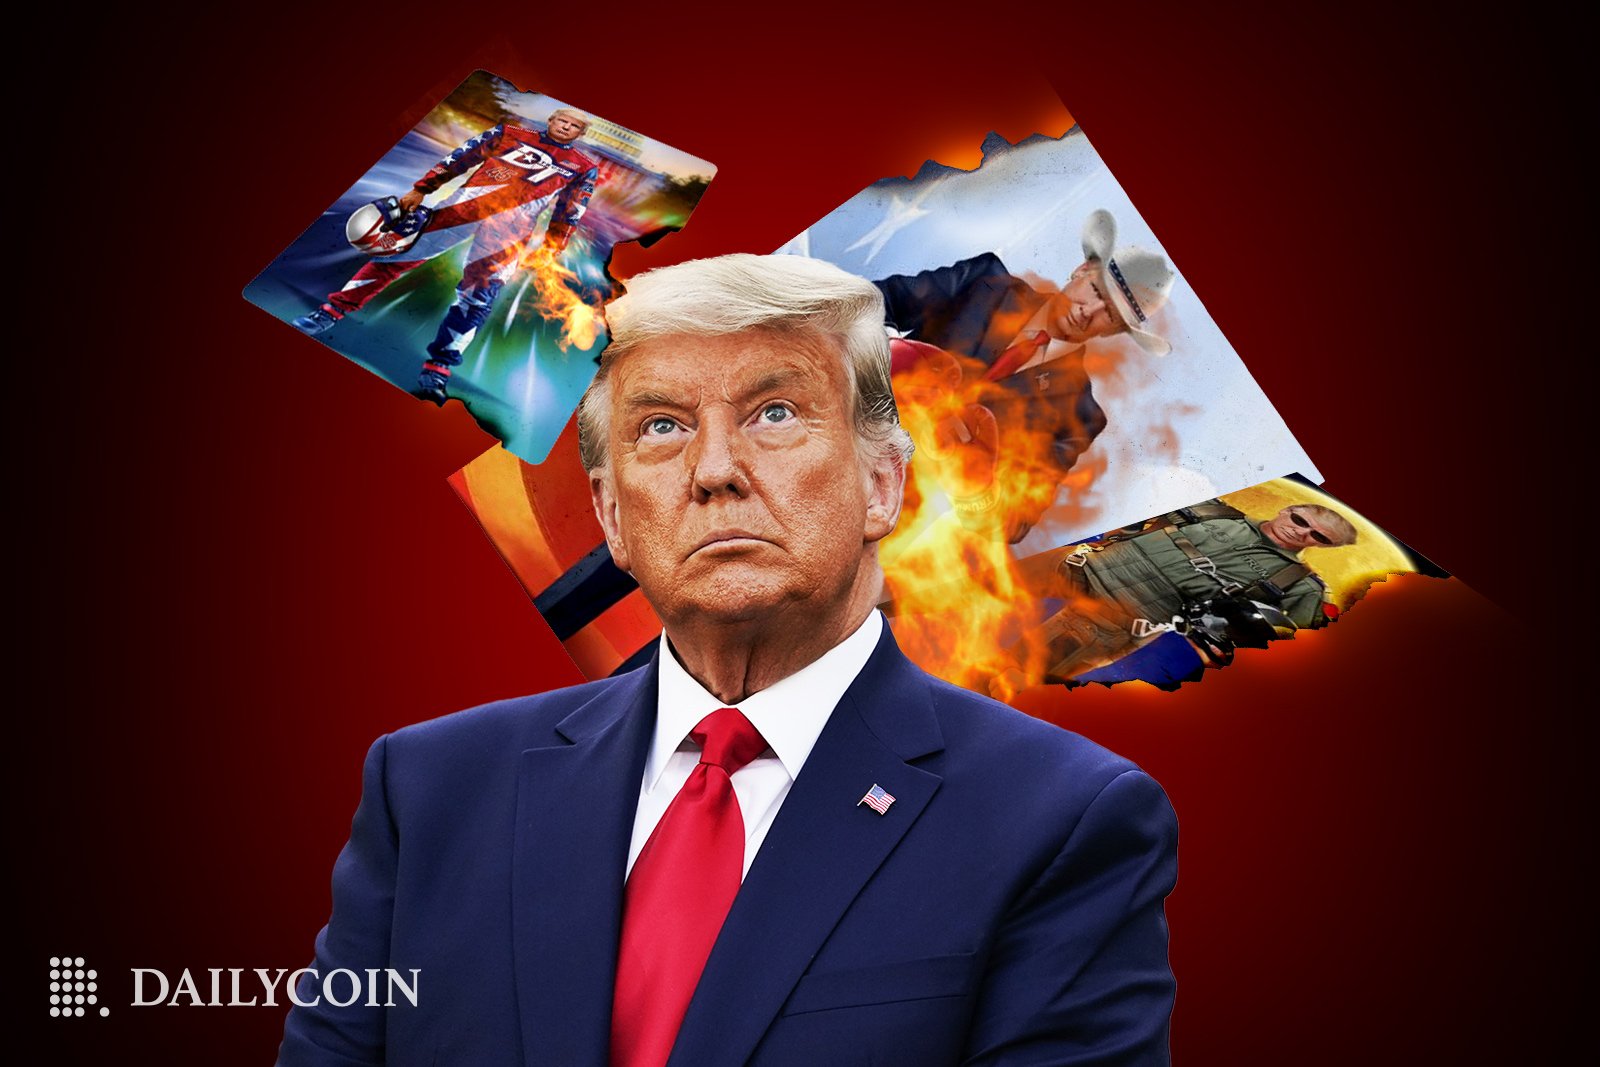 Donald Trump is watching over Trump posters on fire floating around on a dark red background.